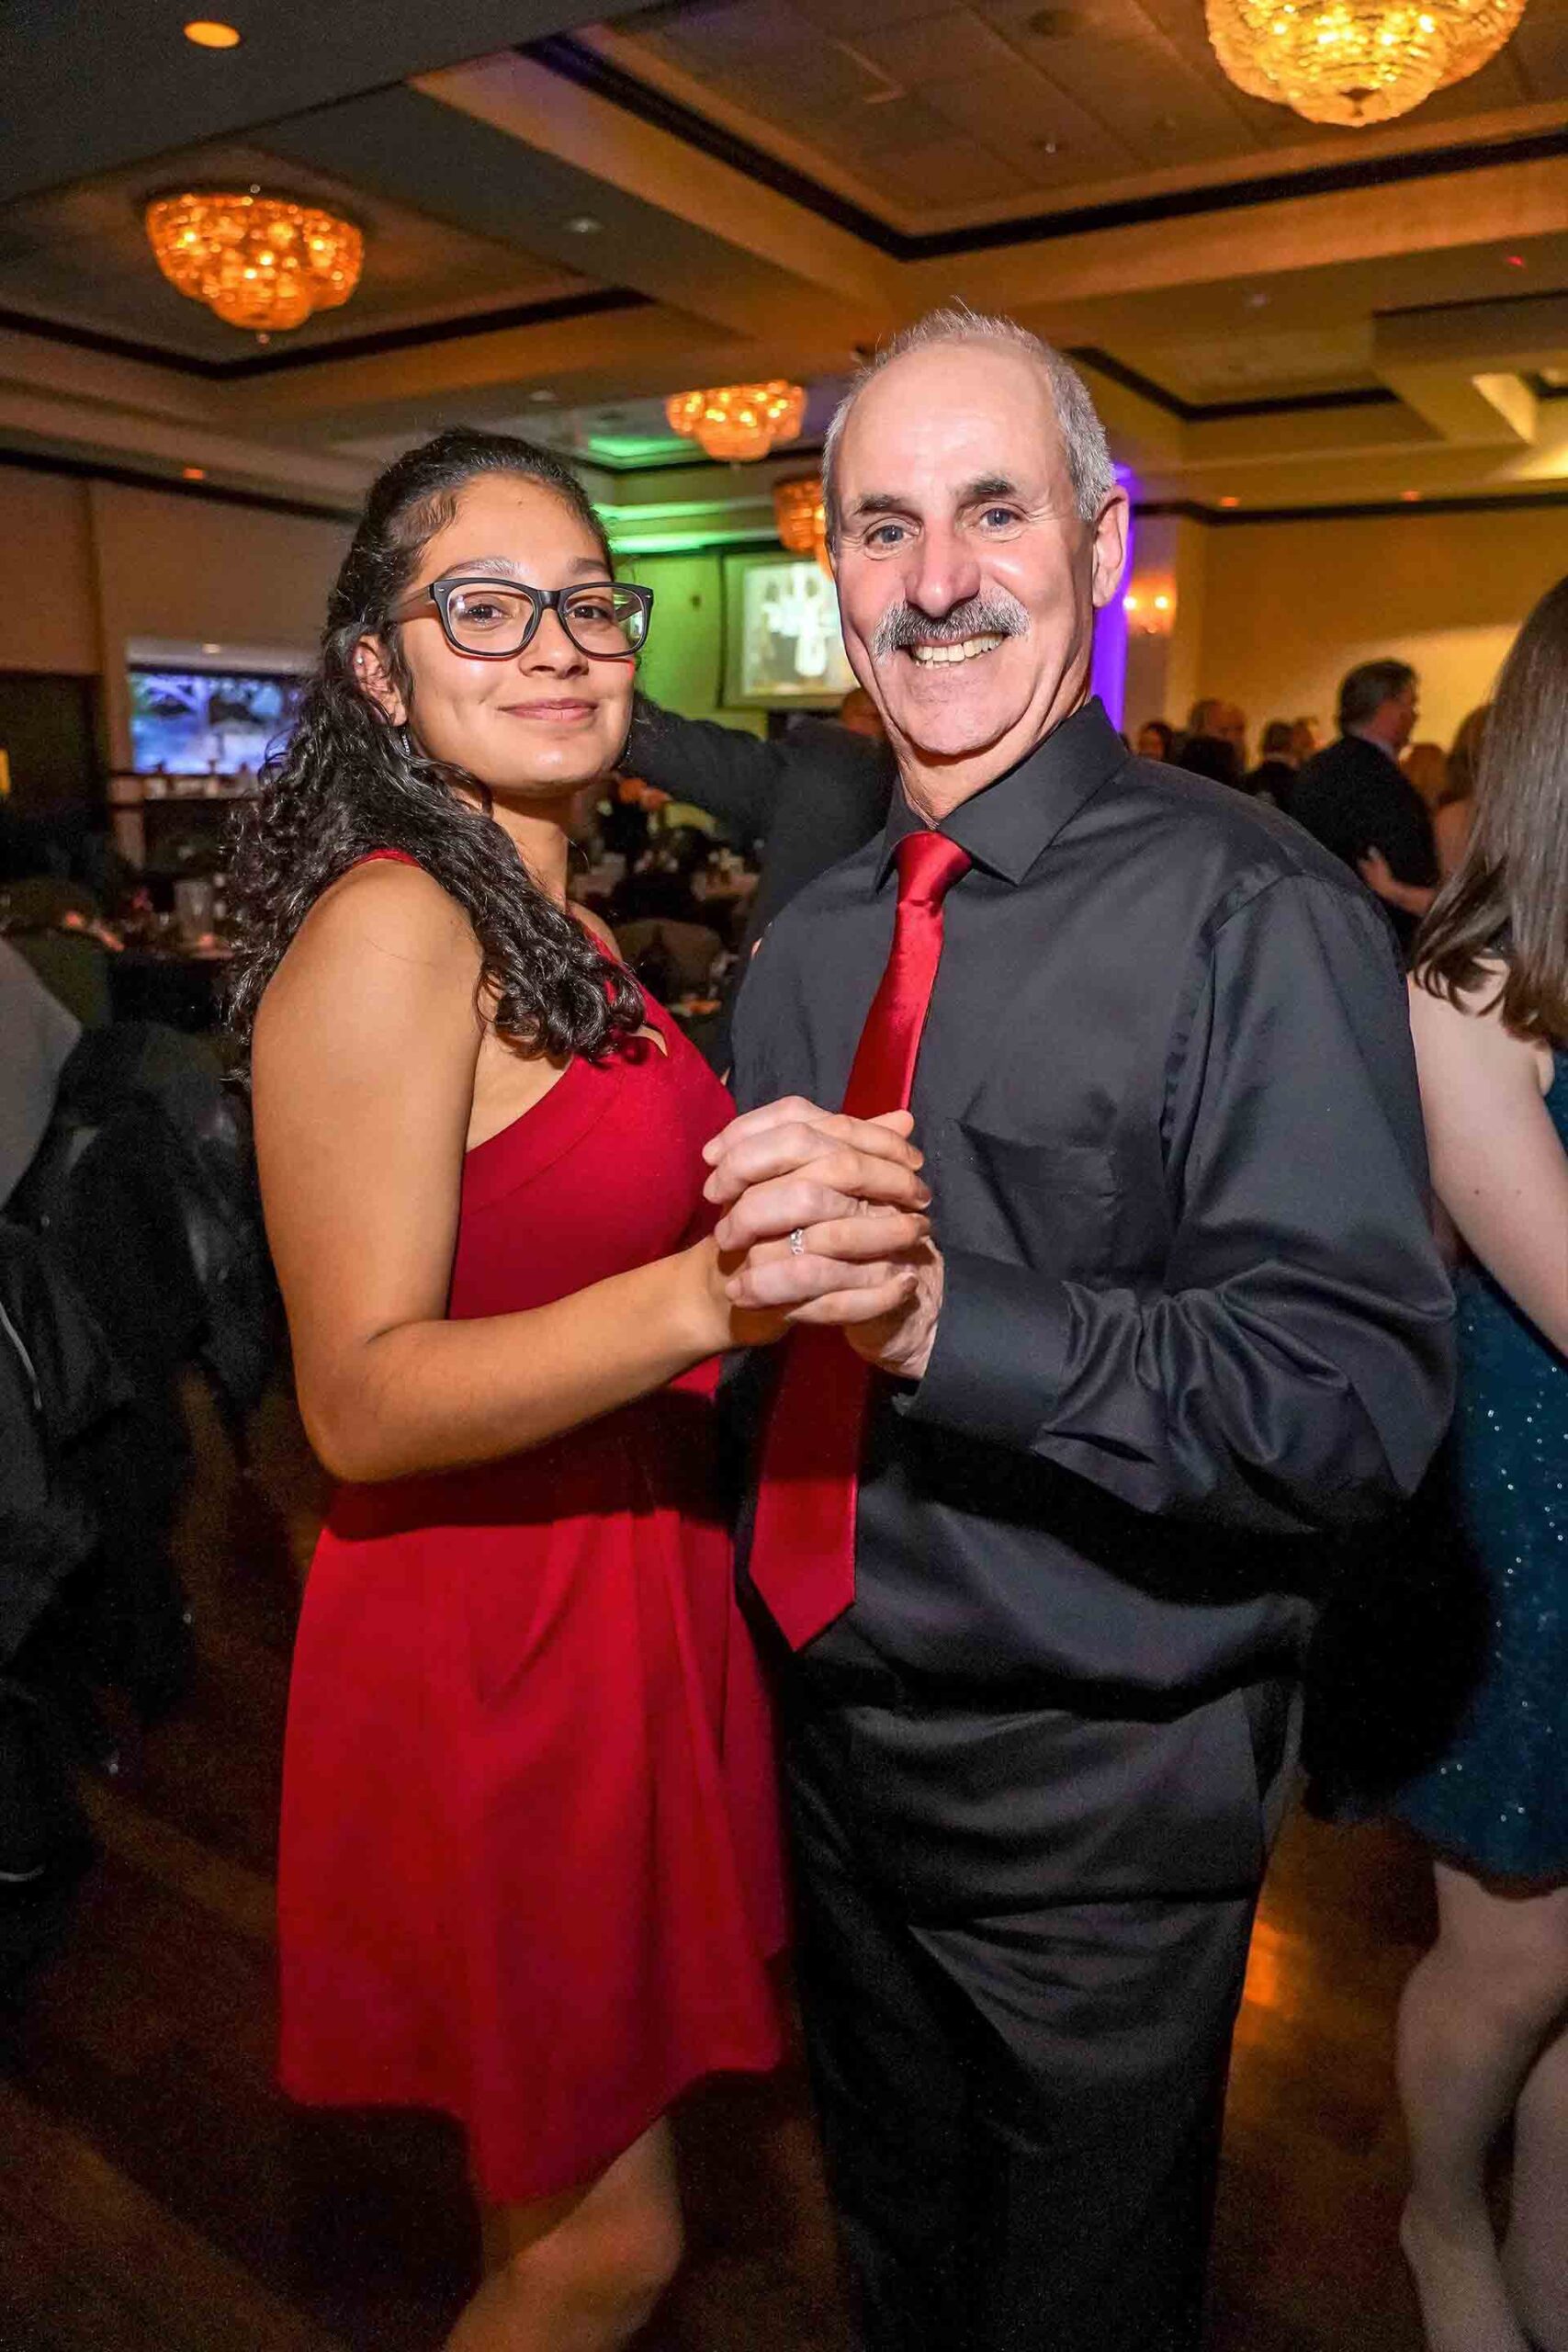 father-daughter-dance-2019-girl-with-red-dress-and-glasses-dancing-with-father